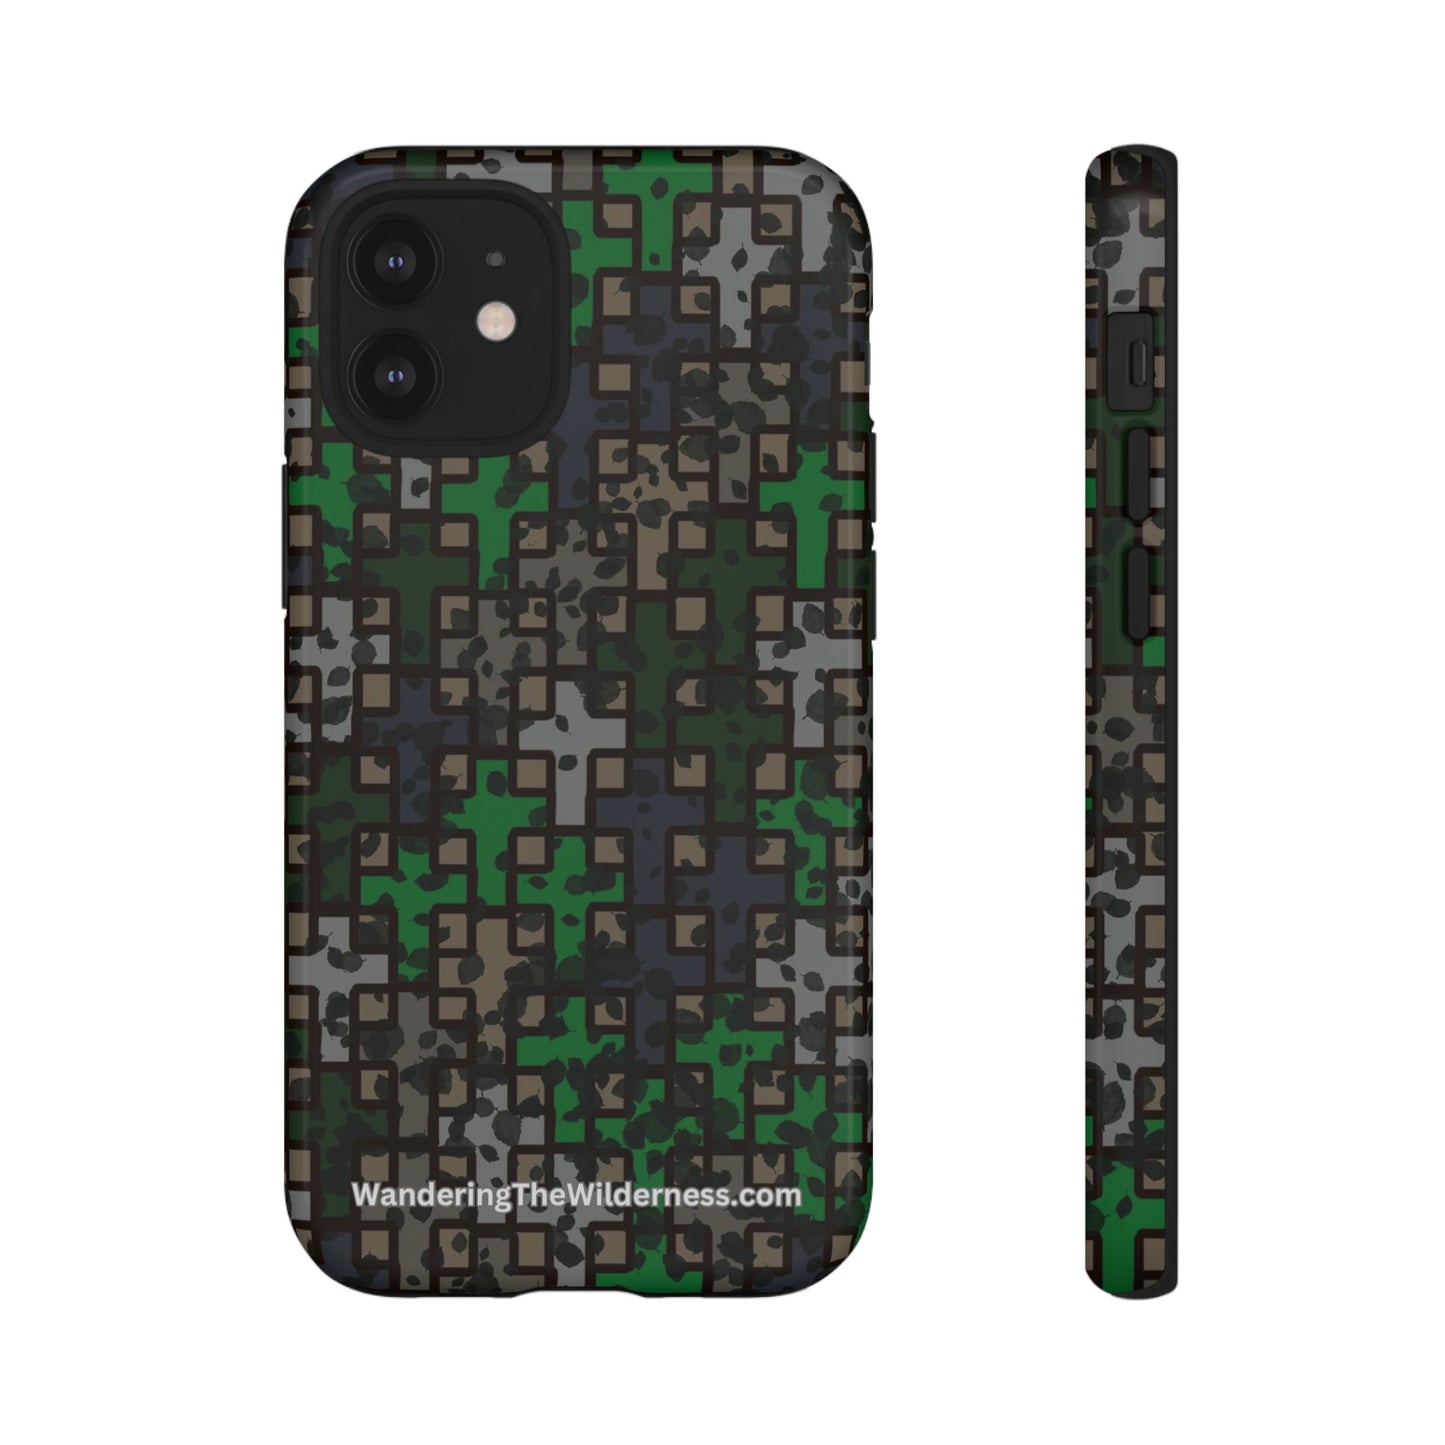 Wandering the Wilderness Mossback Camo Tough Cases